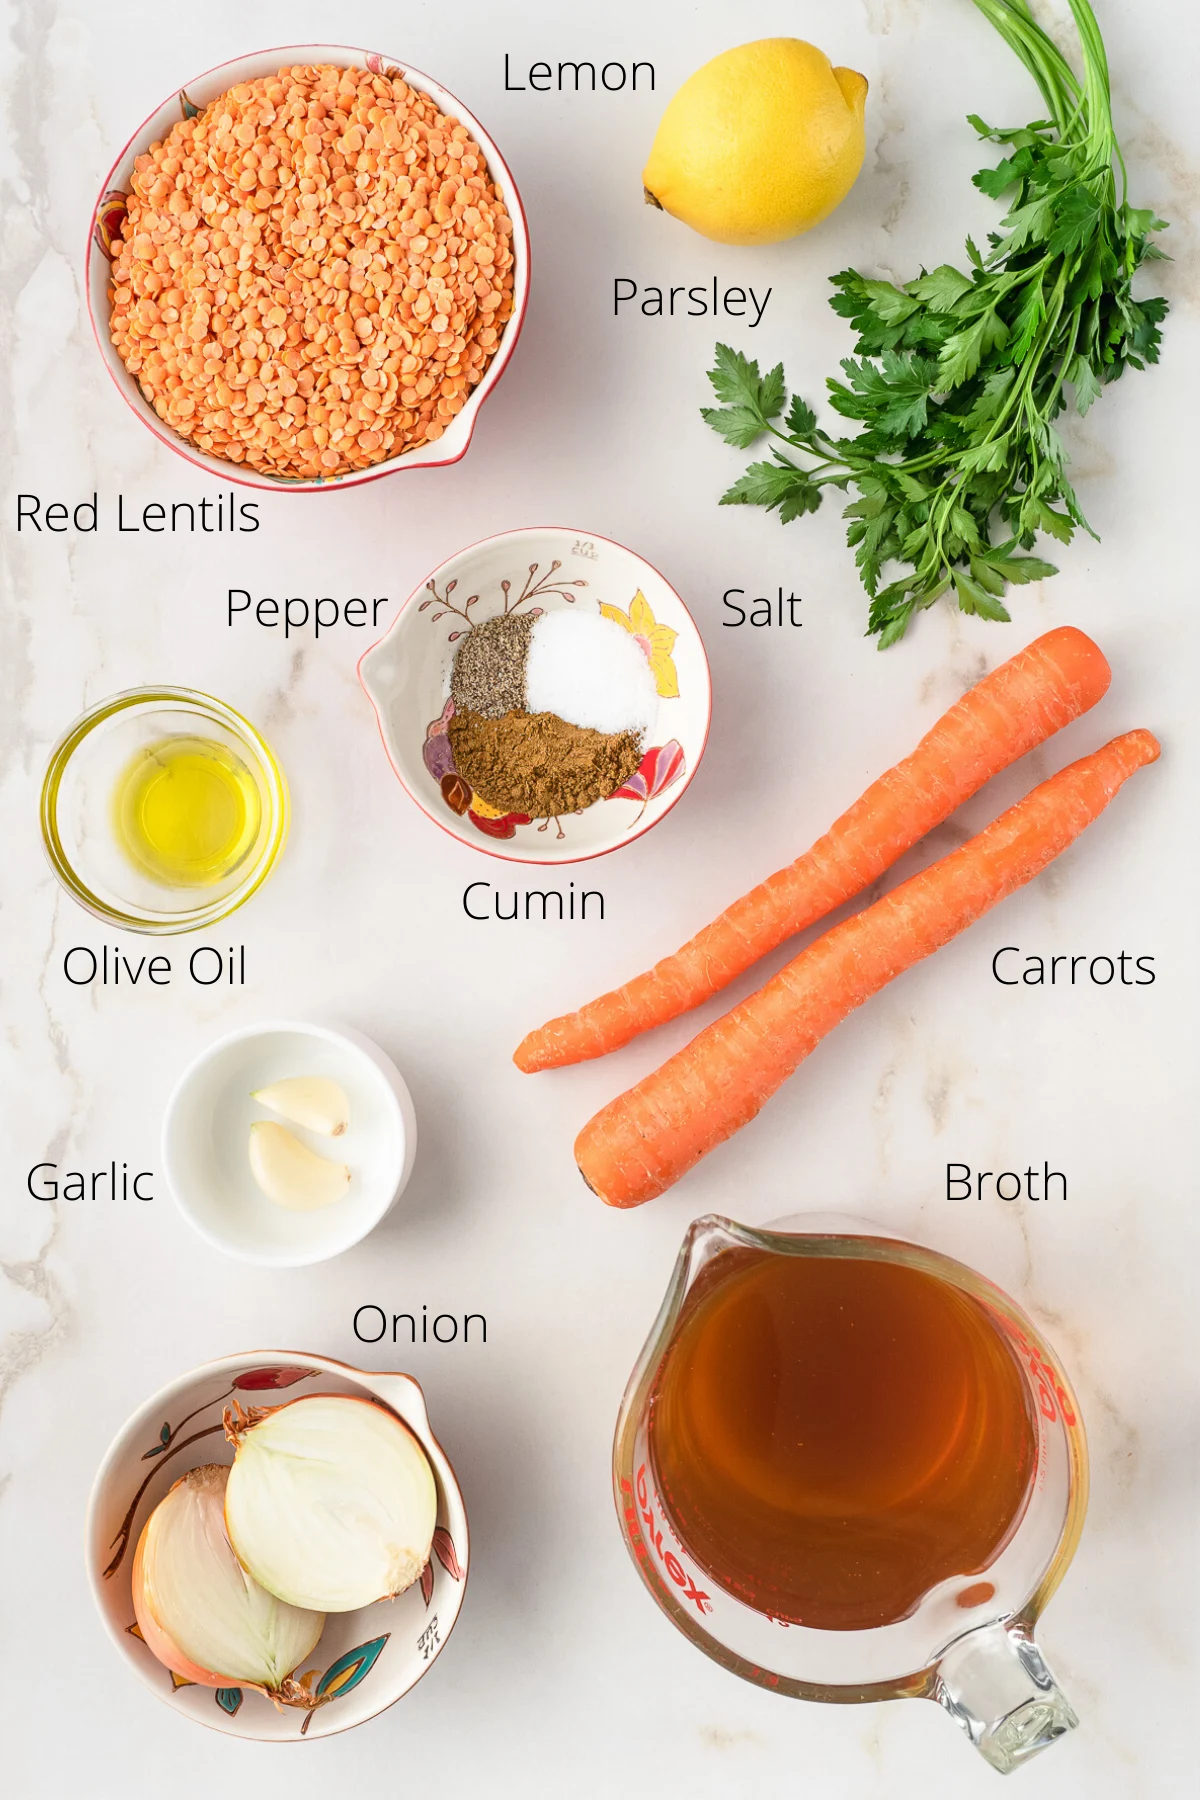 Image of ingredients needed to make a red lentil soup.